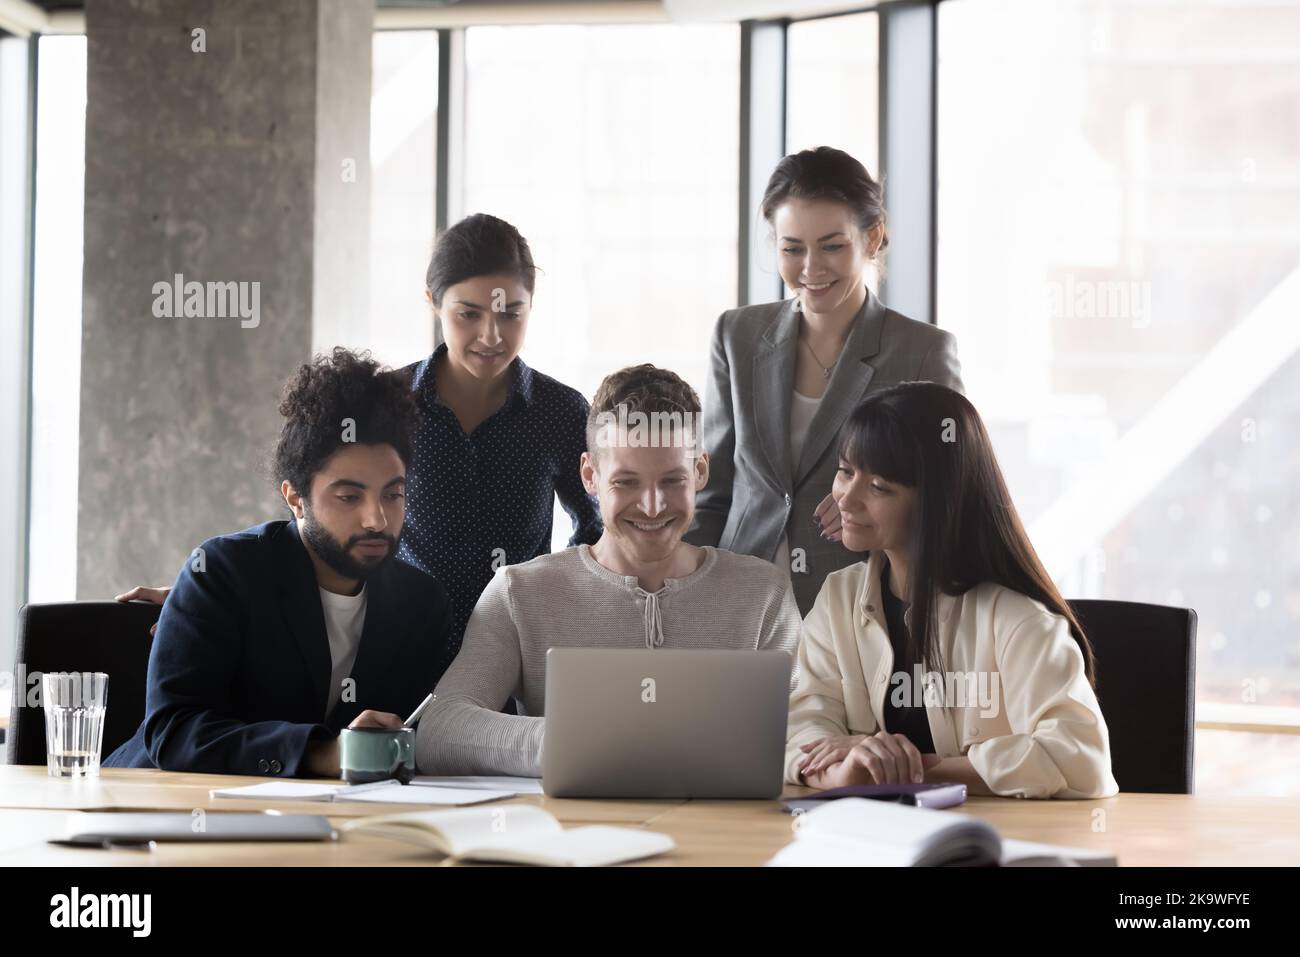 Group of multi ethnic businesspeople working together on laptop Stock Photo